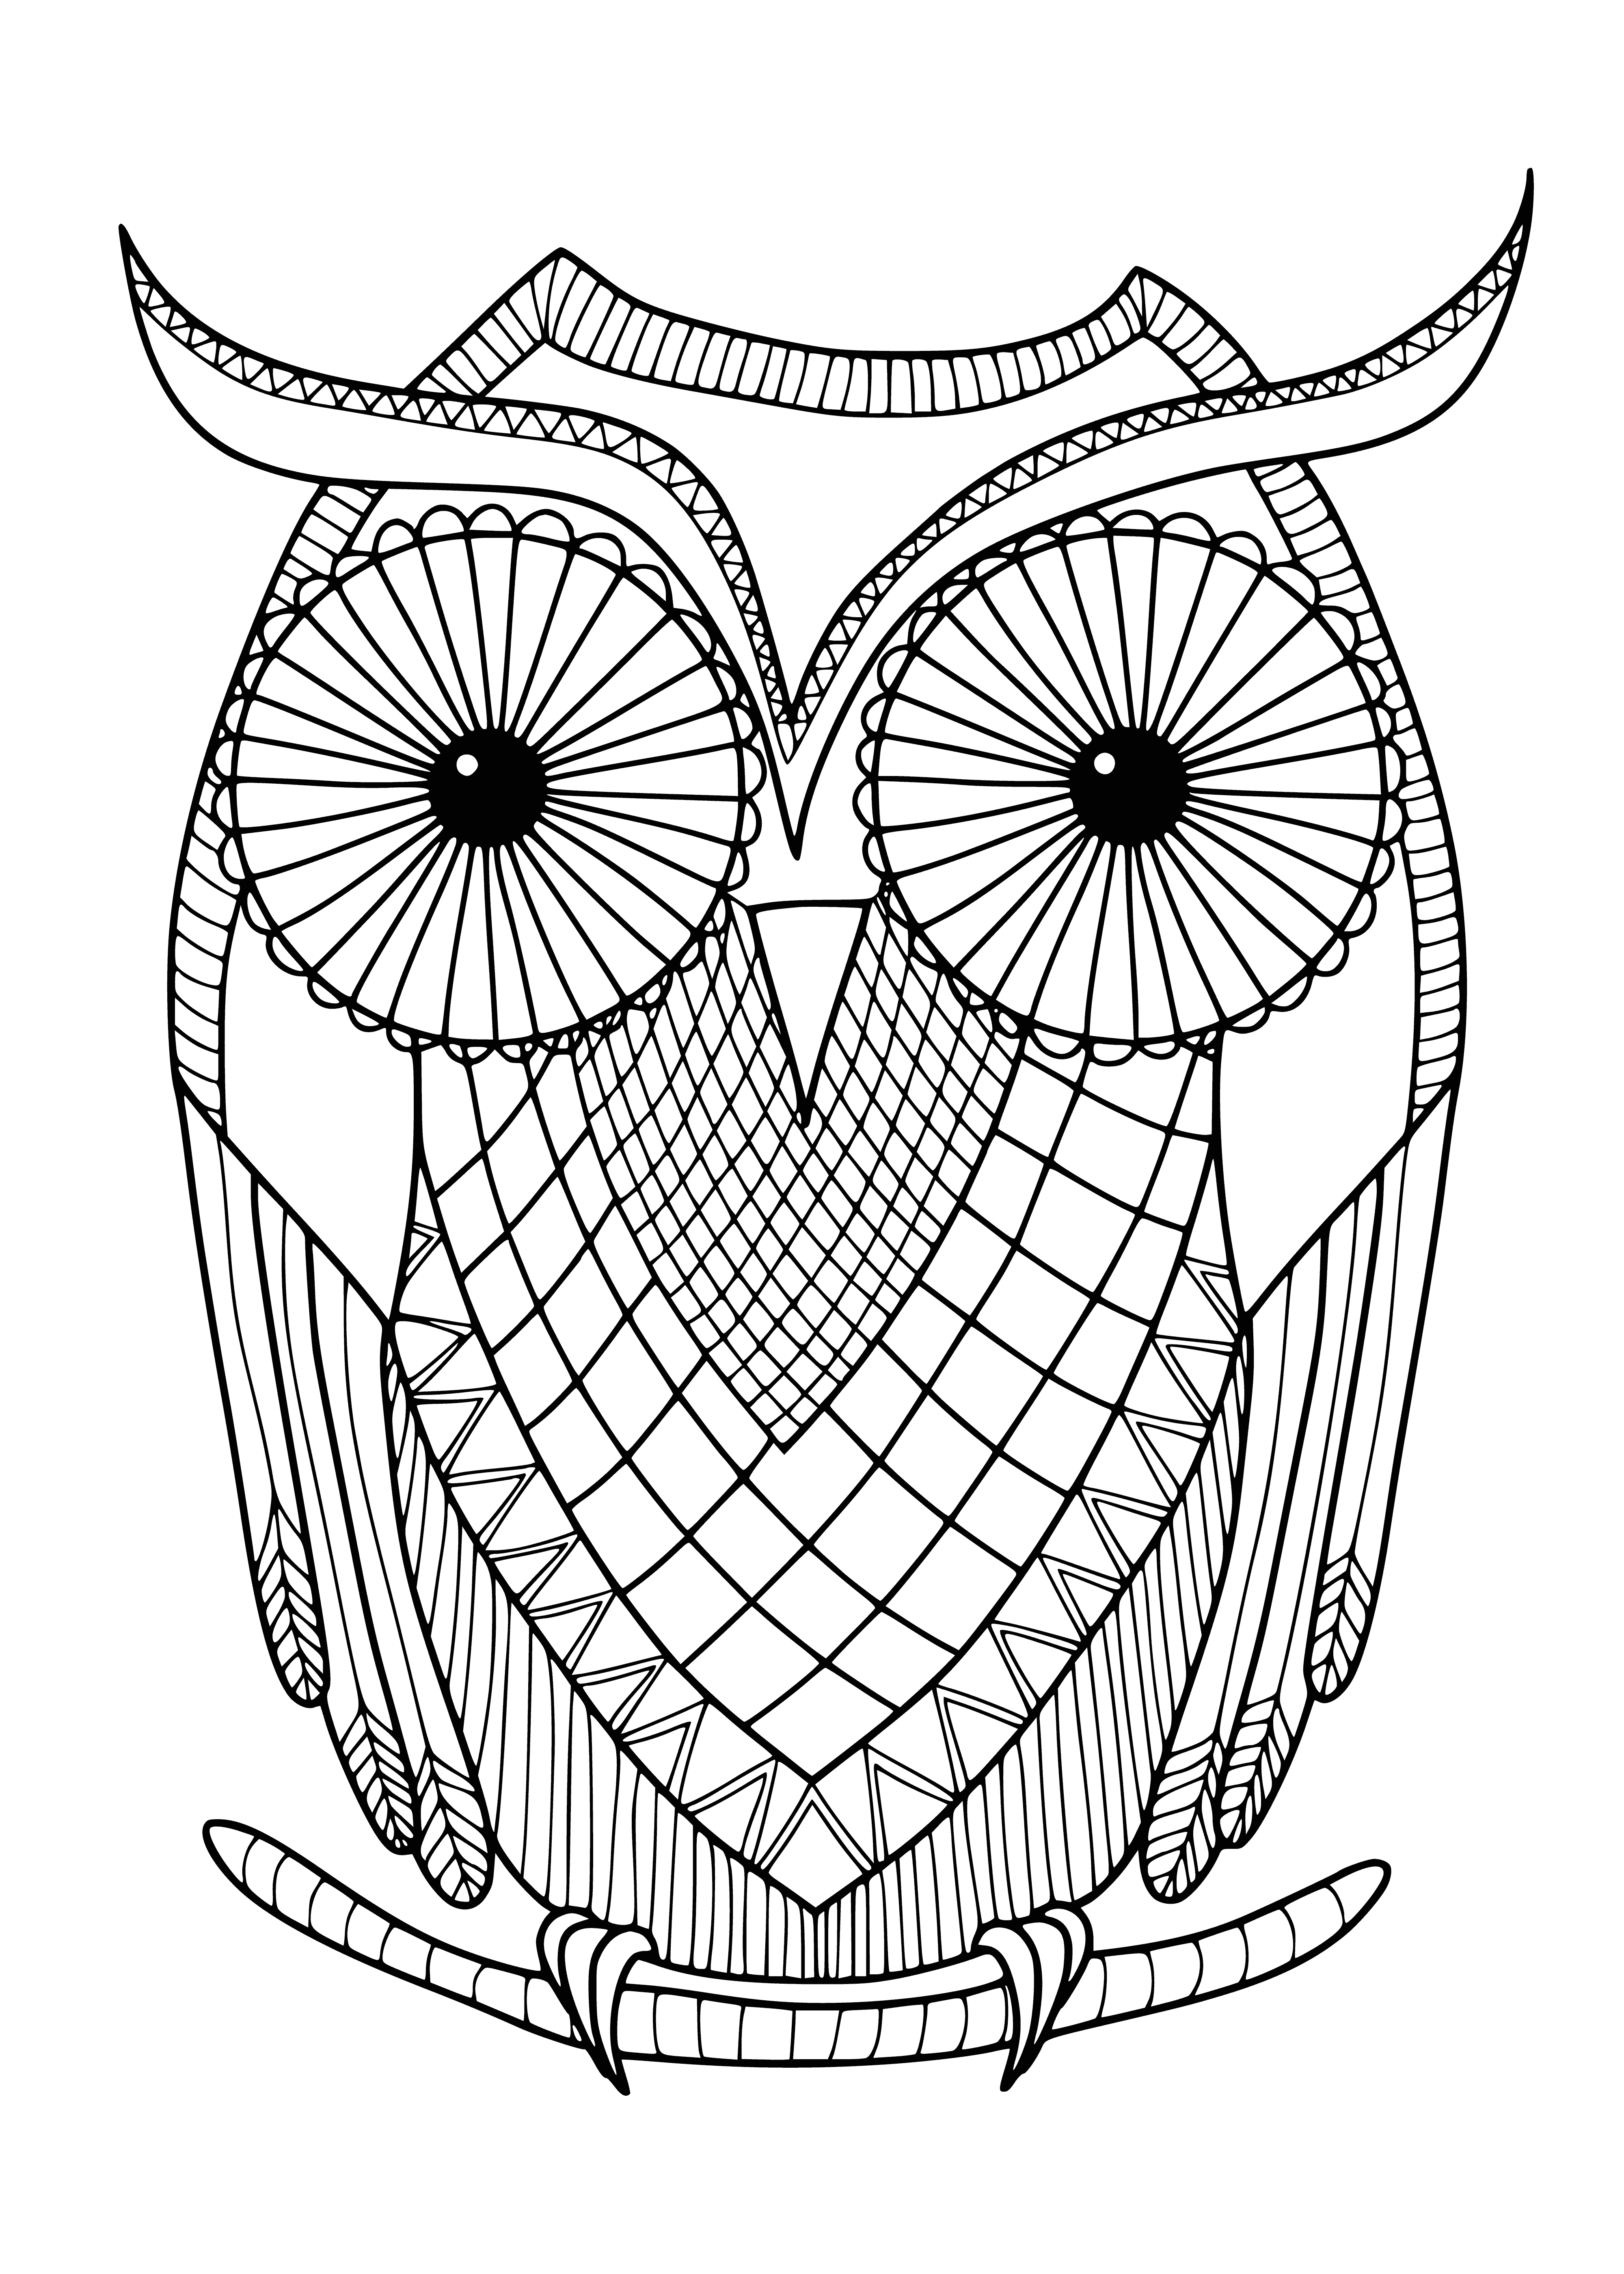 coloring page: Two owls, one brown & one white, sit on a tree branch. Brown owl has eyes closed, white has eyes open. #coloringpage